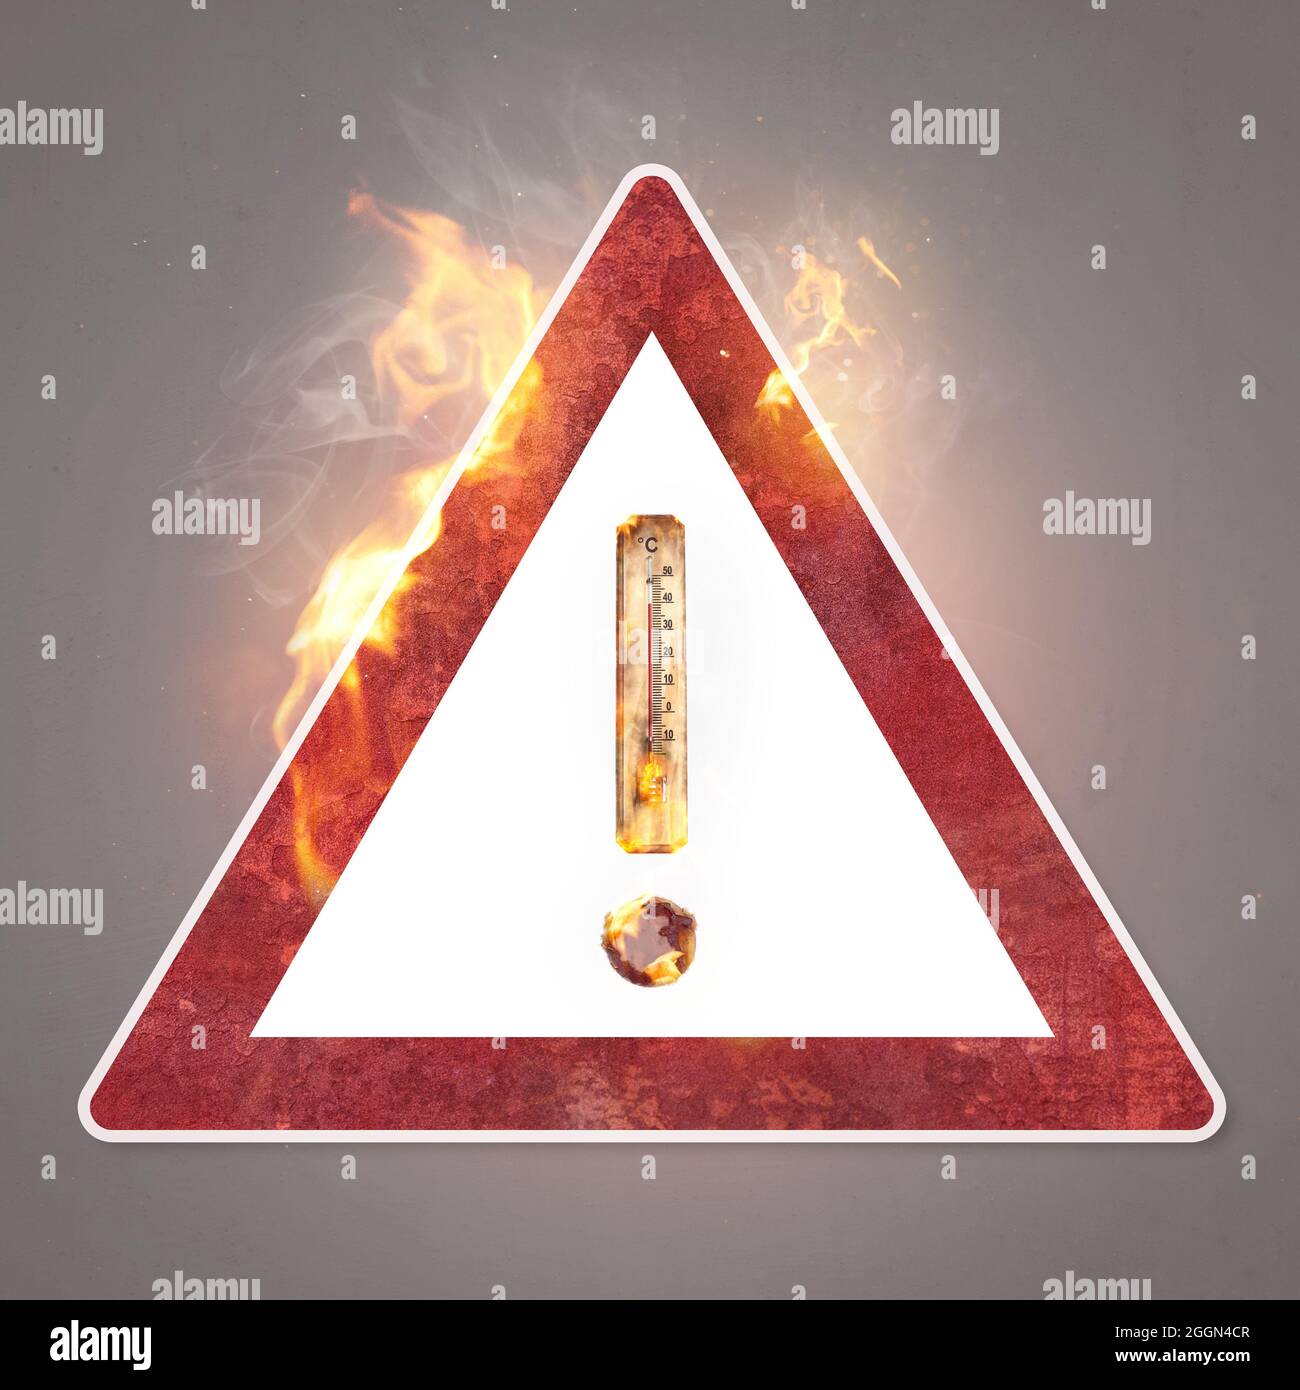 Warning sign with a burning thermometer - global warming concept Stock Photo